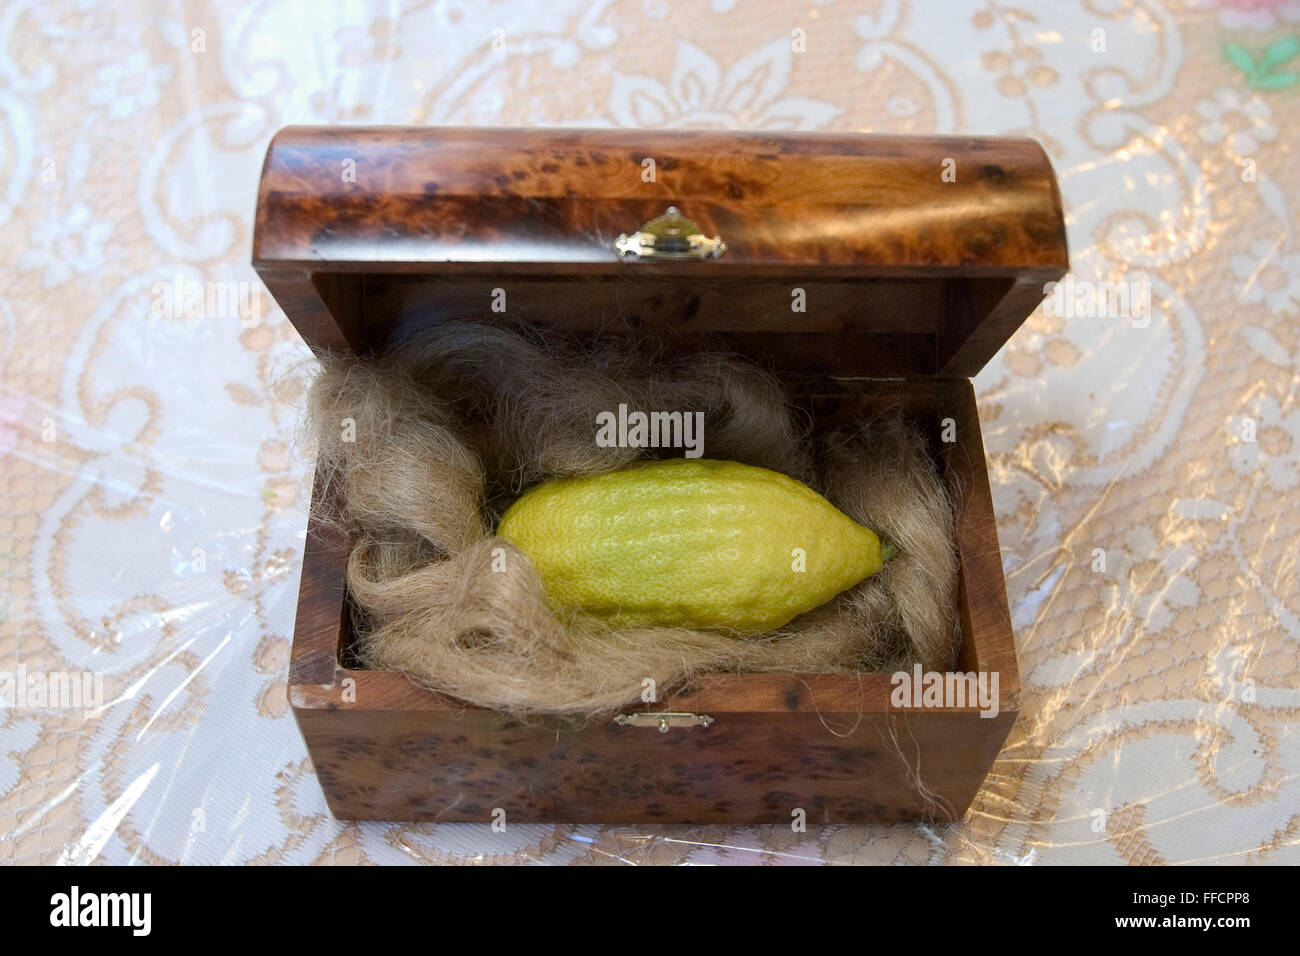 An Etrog (Citron) on a bed of horsehair inside a presentation box. The etrog is used in the mitzvah of the four species for the festival of Sukkot, the feast of Tabernacles. The holiday of Sukkot commemorates the forty-year period during which the children of Israel were wandering in the desert. Stock Photo